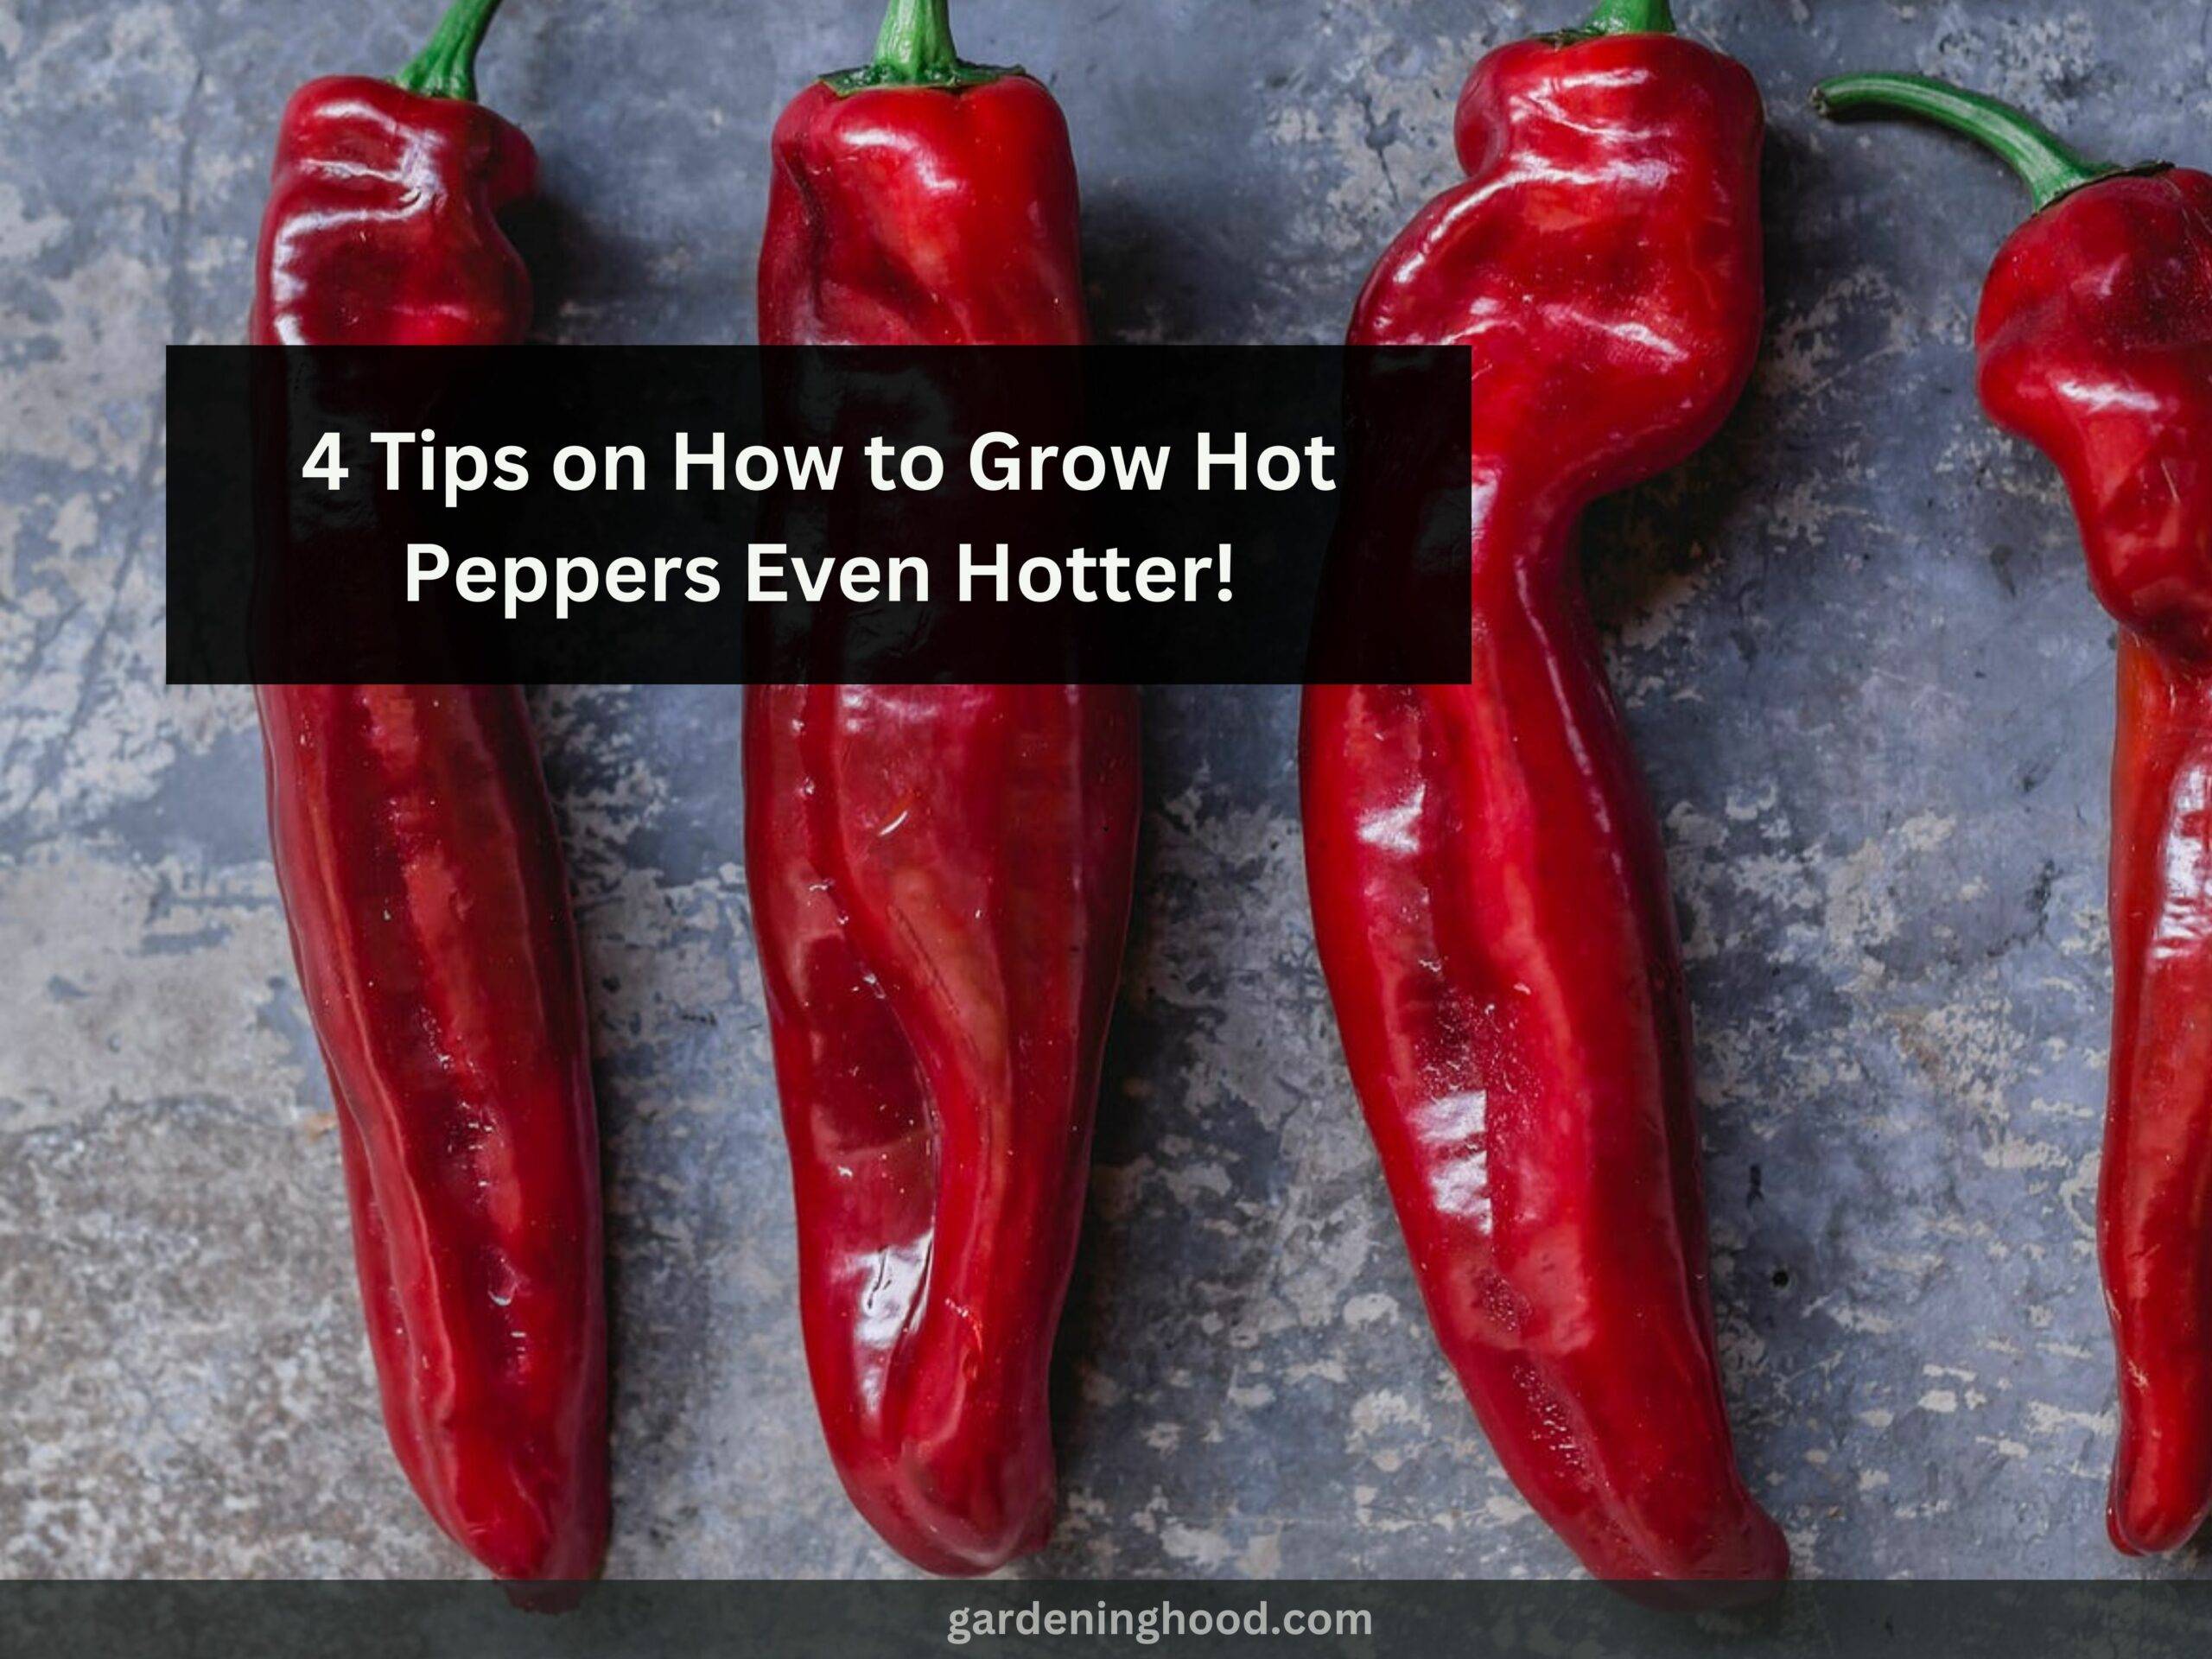 4 Tips on How to Grow Hot Peppers Even Hotter!